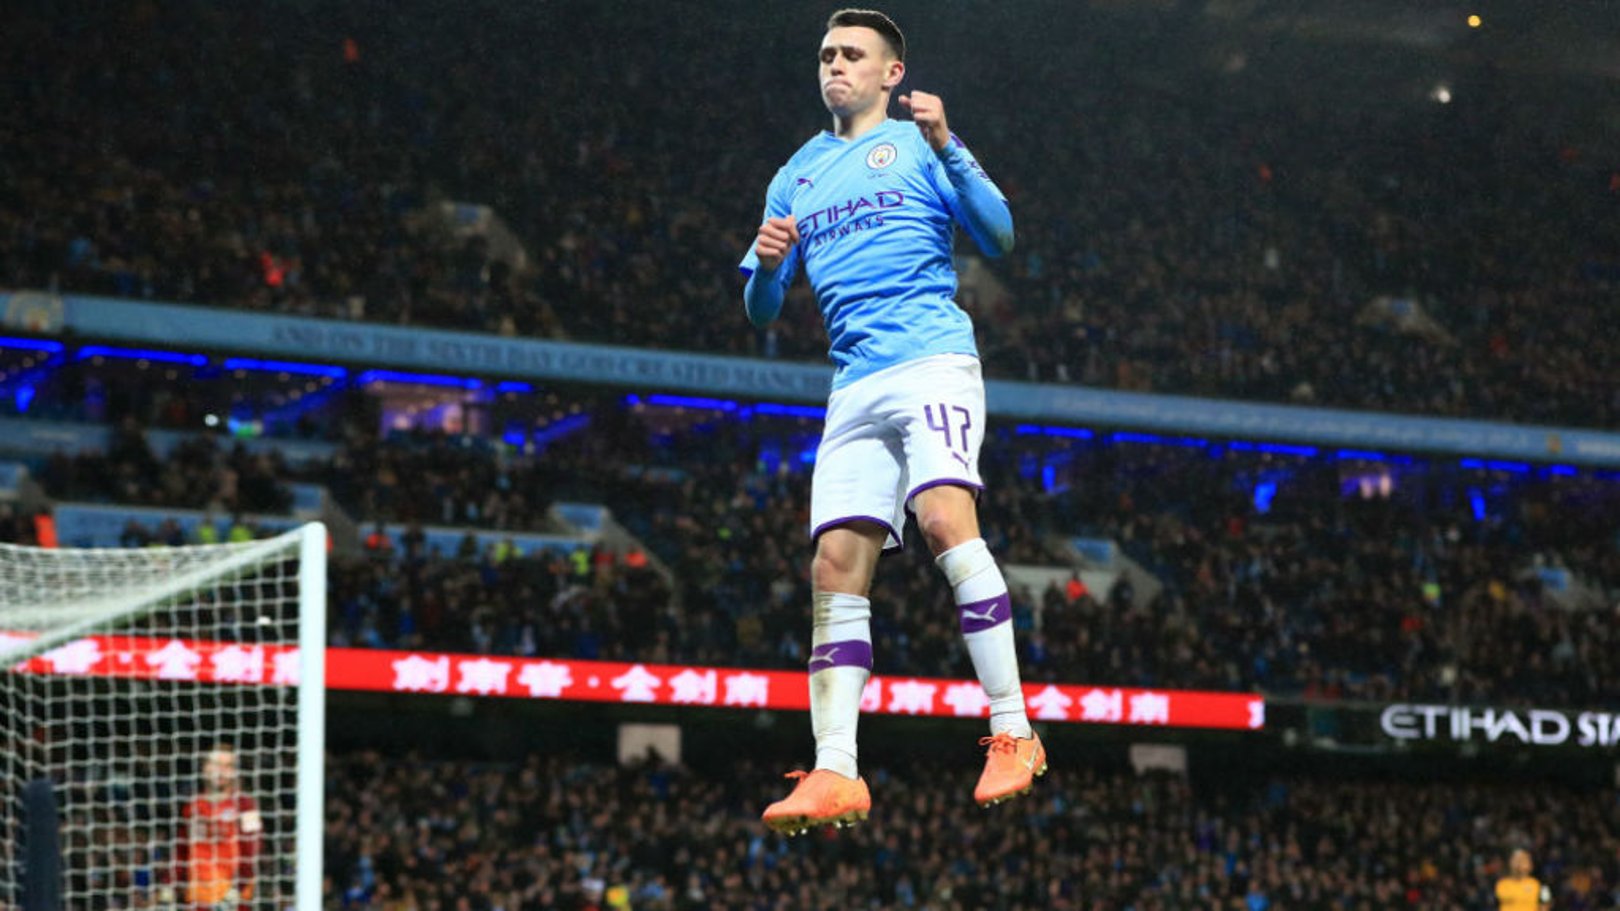 HIGH AND MIGHTY: Phil Foden celebrates what was a superb strike